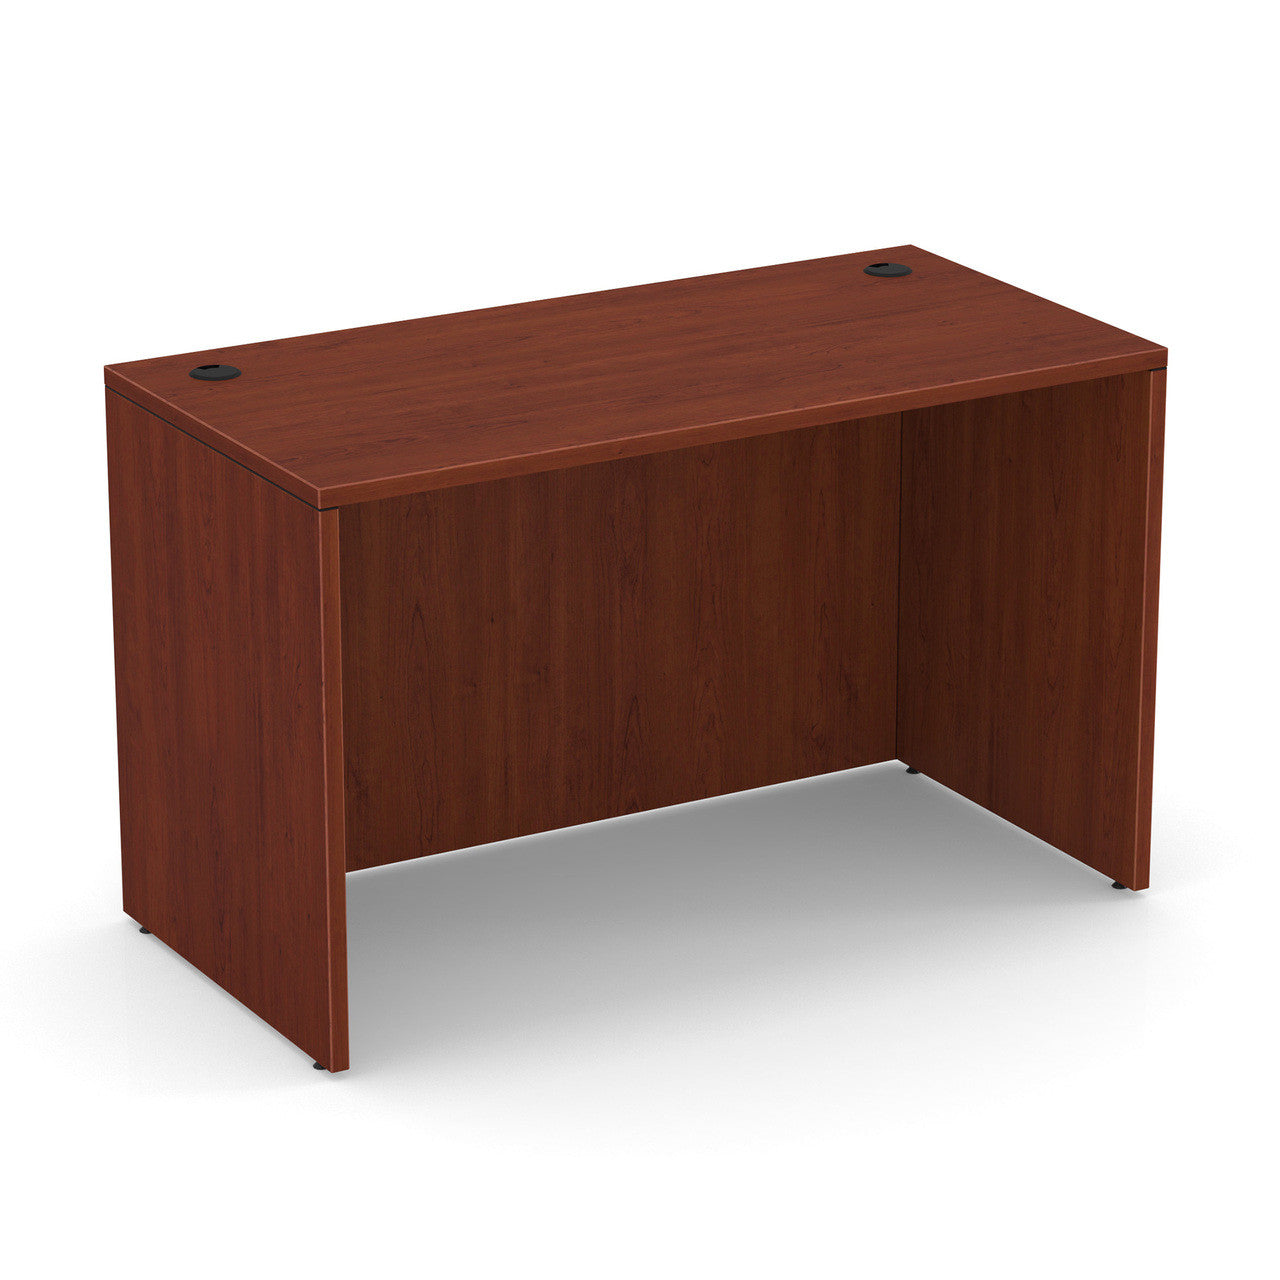 OS Laminate Collection Desk Shell - 48''W x 30''D - Cherry